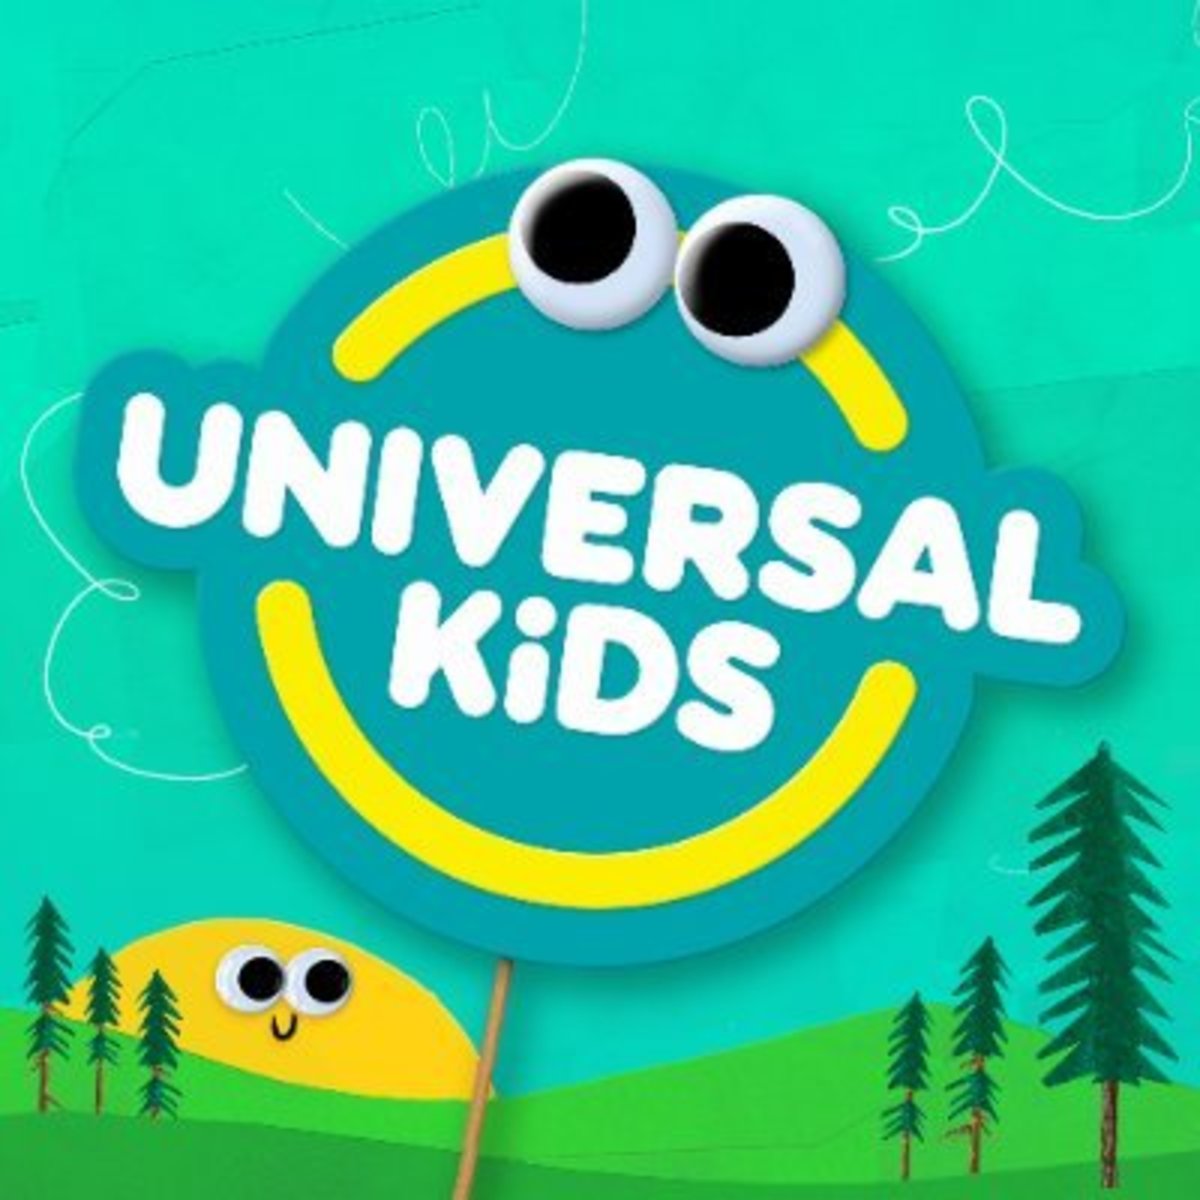 Universal Kids is the new name